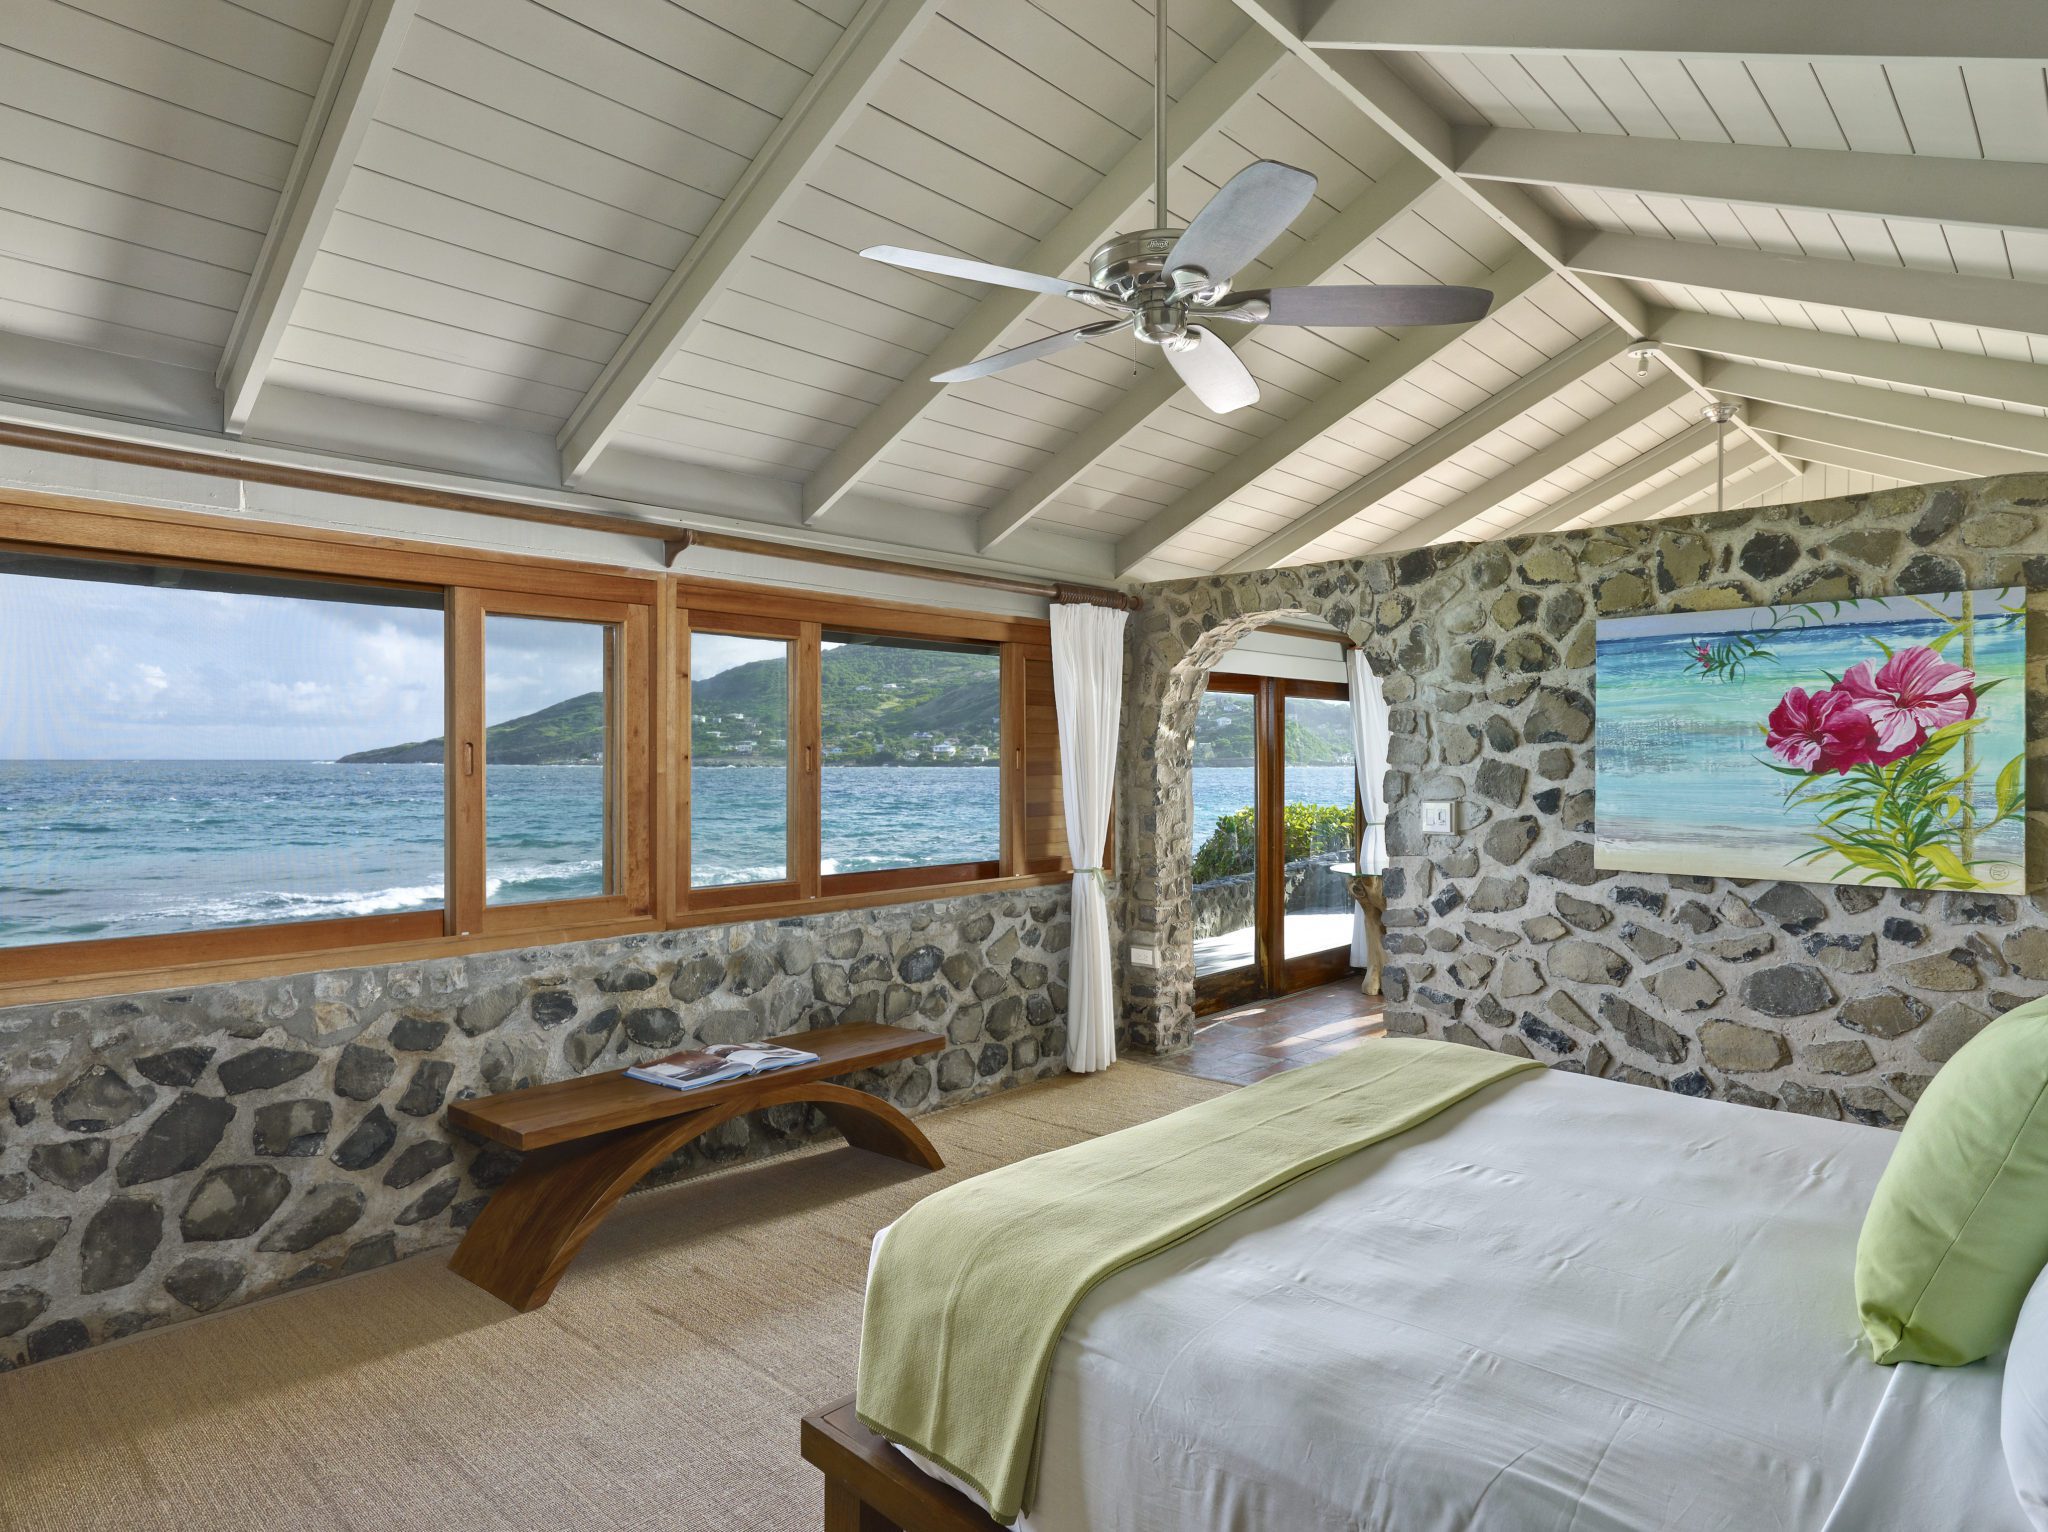 One-bedroom cottage for families at Petit St Vincent private Caribbean island